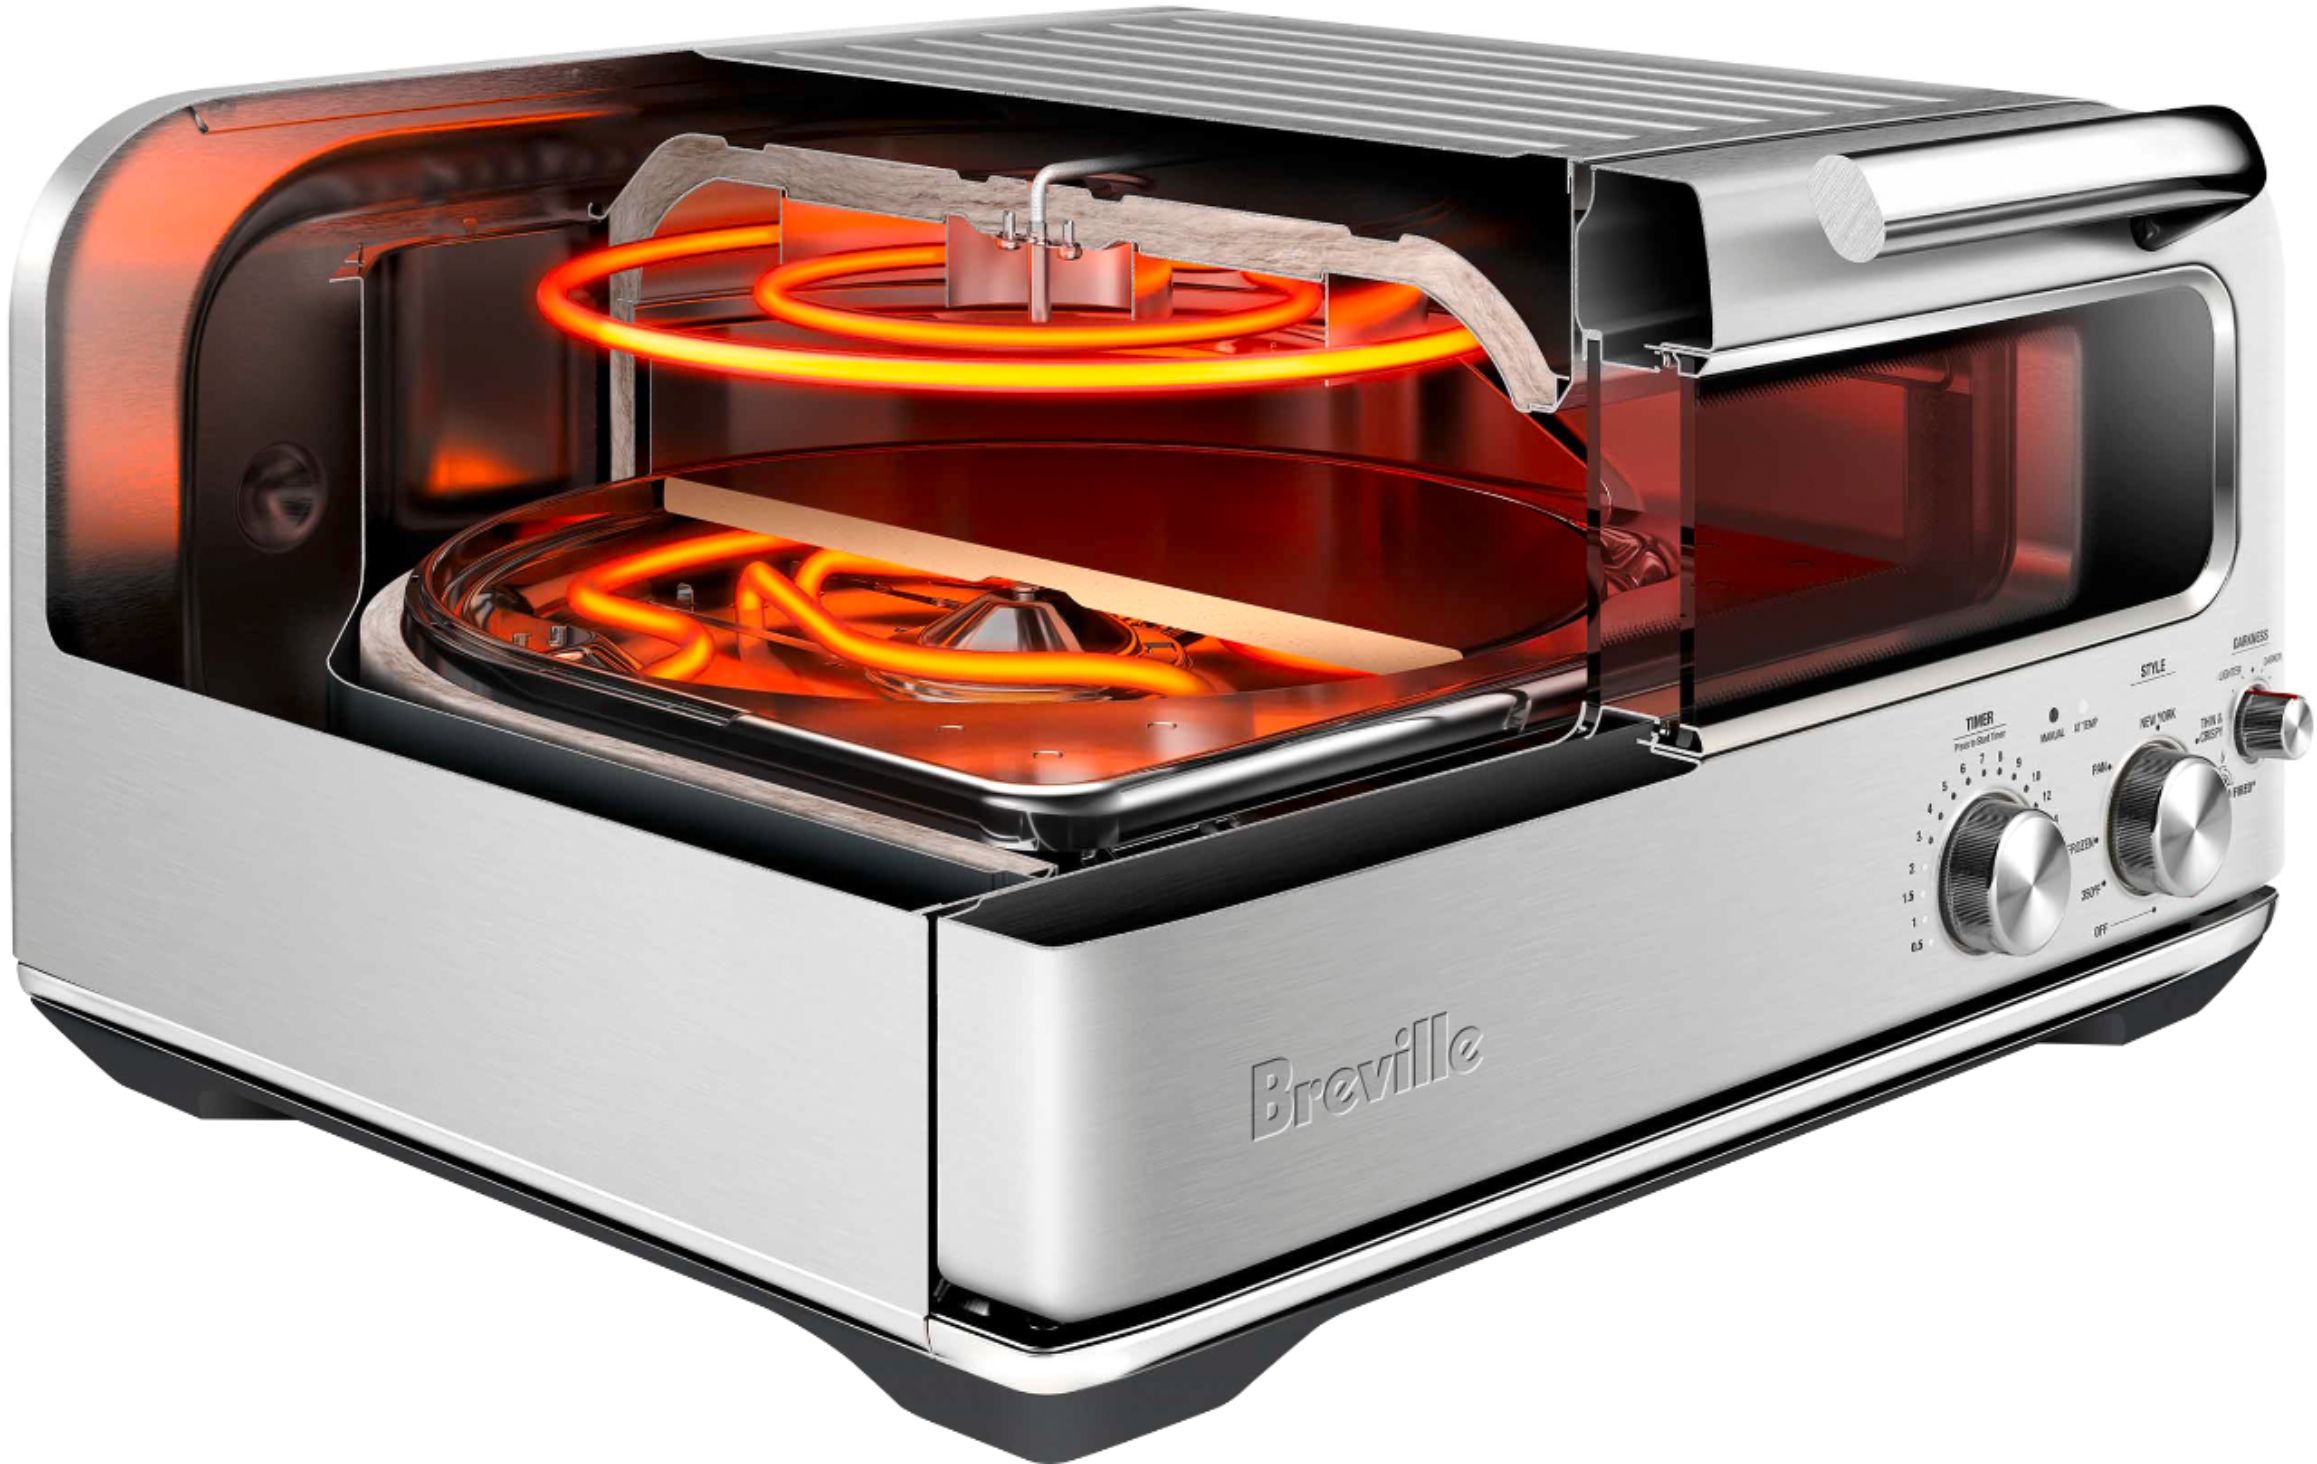 Oster Convection Toaster/Pizza Oven Brushed chrome  - Best Buy